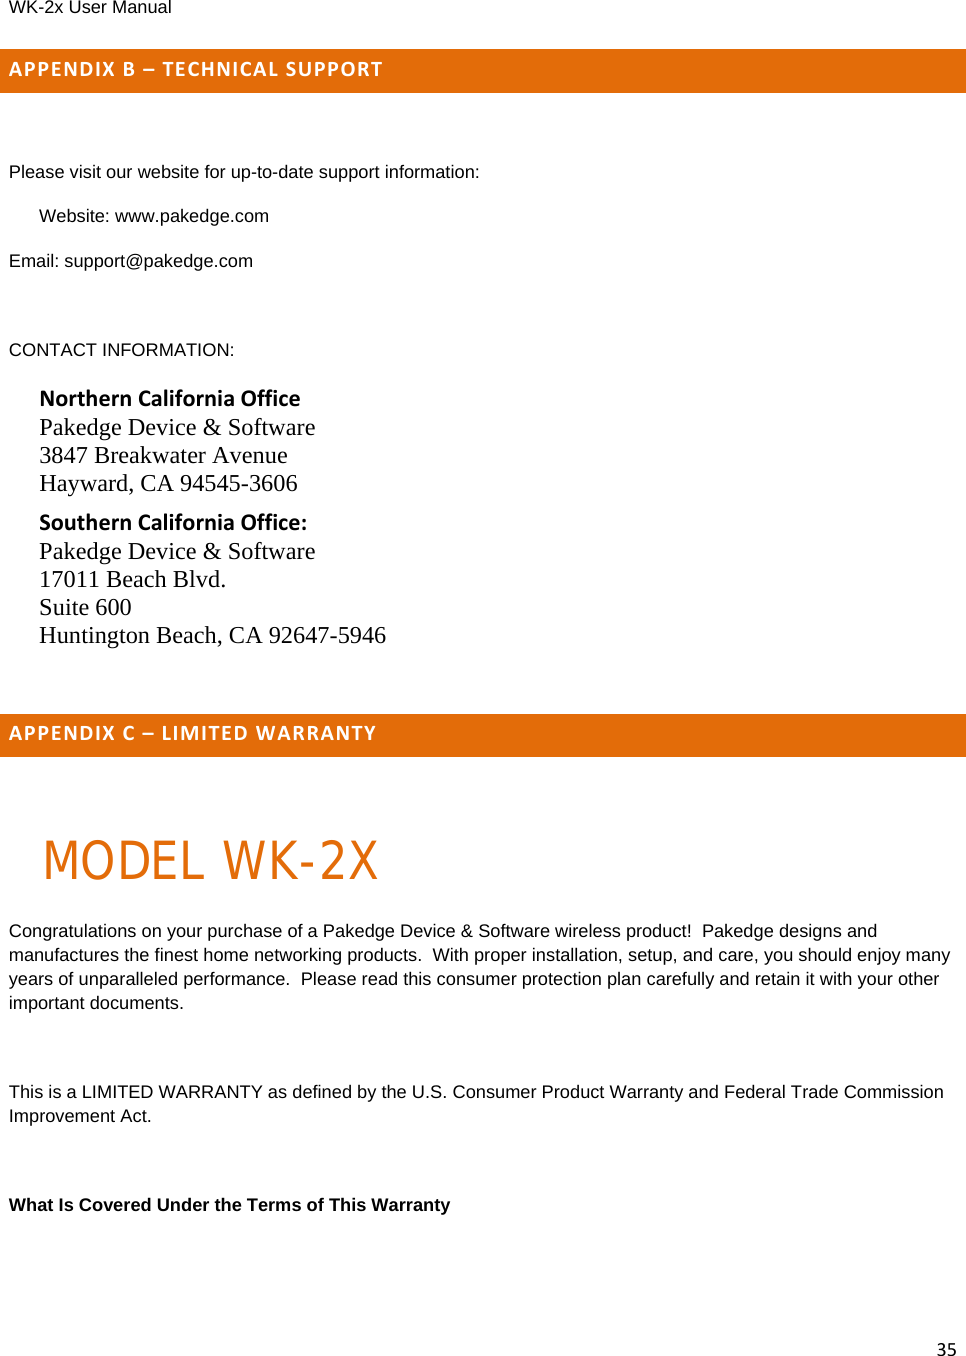 WK-2x User Manual 35APPENDIXB–TECHNICALSUPPORTPlease visit our website for up-to-date support information: Website: www.pakedge.com Email: support@pakedge.com  CONTACT INFORMATION: NorthernCaliforniaOffice Pakedge Device &amp; Software 3847 Breakwater Avenue Hayward, CA 94545-3606 SouthernCaliforniaOffice: Pakedge Device &amp; Software 17011 Beach Blvd. Suite 600 Huntington Beach, CA 92647-5946  APPENDIXC–LIMITEDWARRANTYMODEL WK-2XCongratulations on your purchase of a Pakedge Device &amp; Software wireless product!  Pakedge designs and manufactures the finest home networking products.  With proper installation, setup, and care, you should enjoy many years of unparalleled performance.  Please read this consumer protection plan carefully and retain it with your other important documents.  This is a LIMITED WARRANTY as defined by the U.S. Consumer Product Warranty and Federal Trade Commission Improvement Act.  What Is Covered Under the Terms of This Warranty  